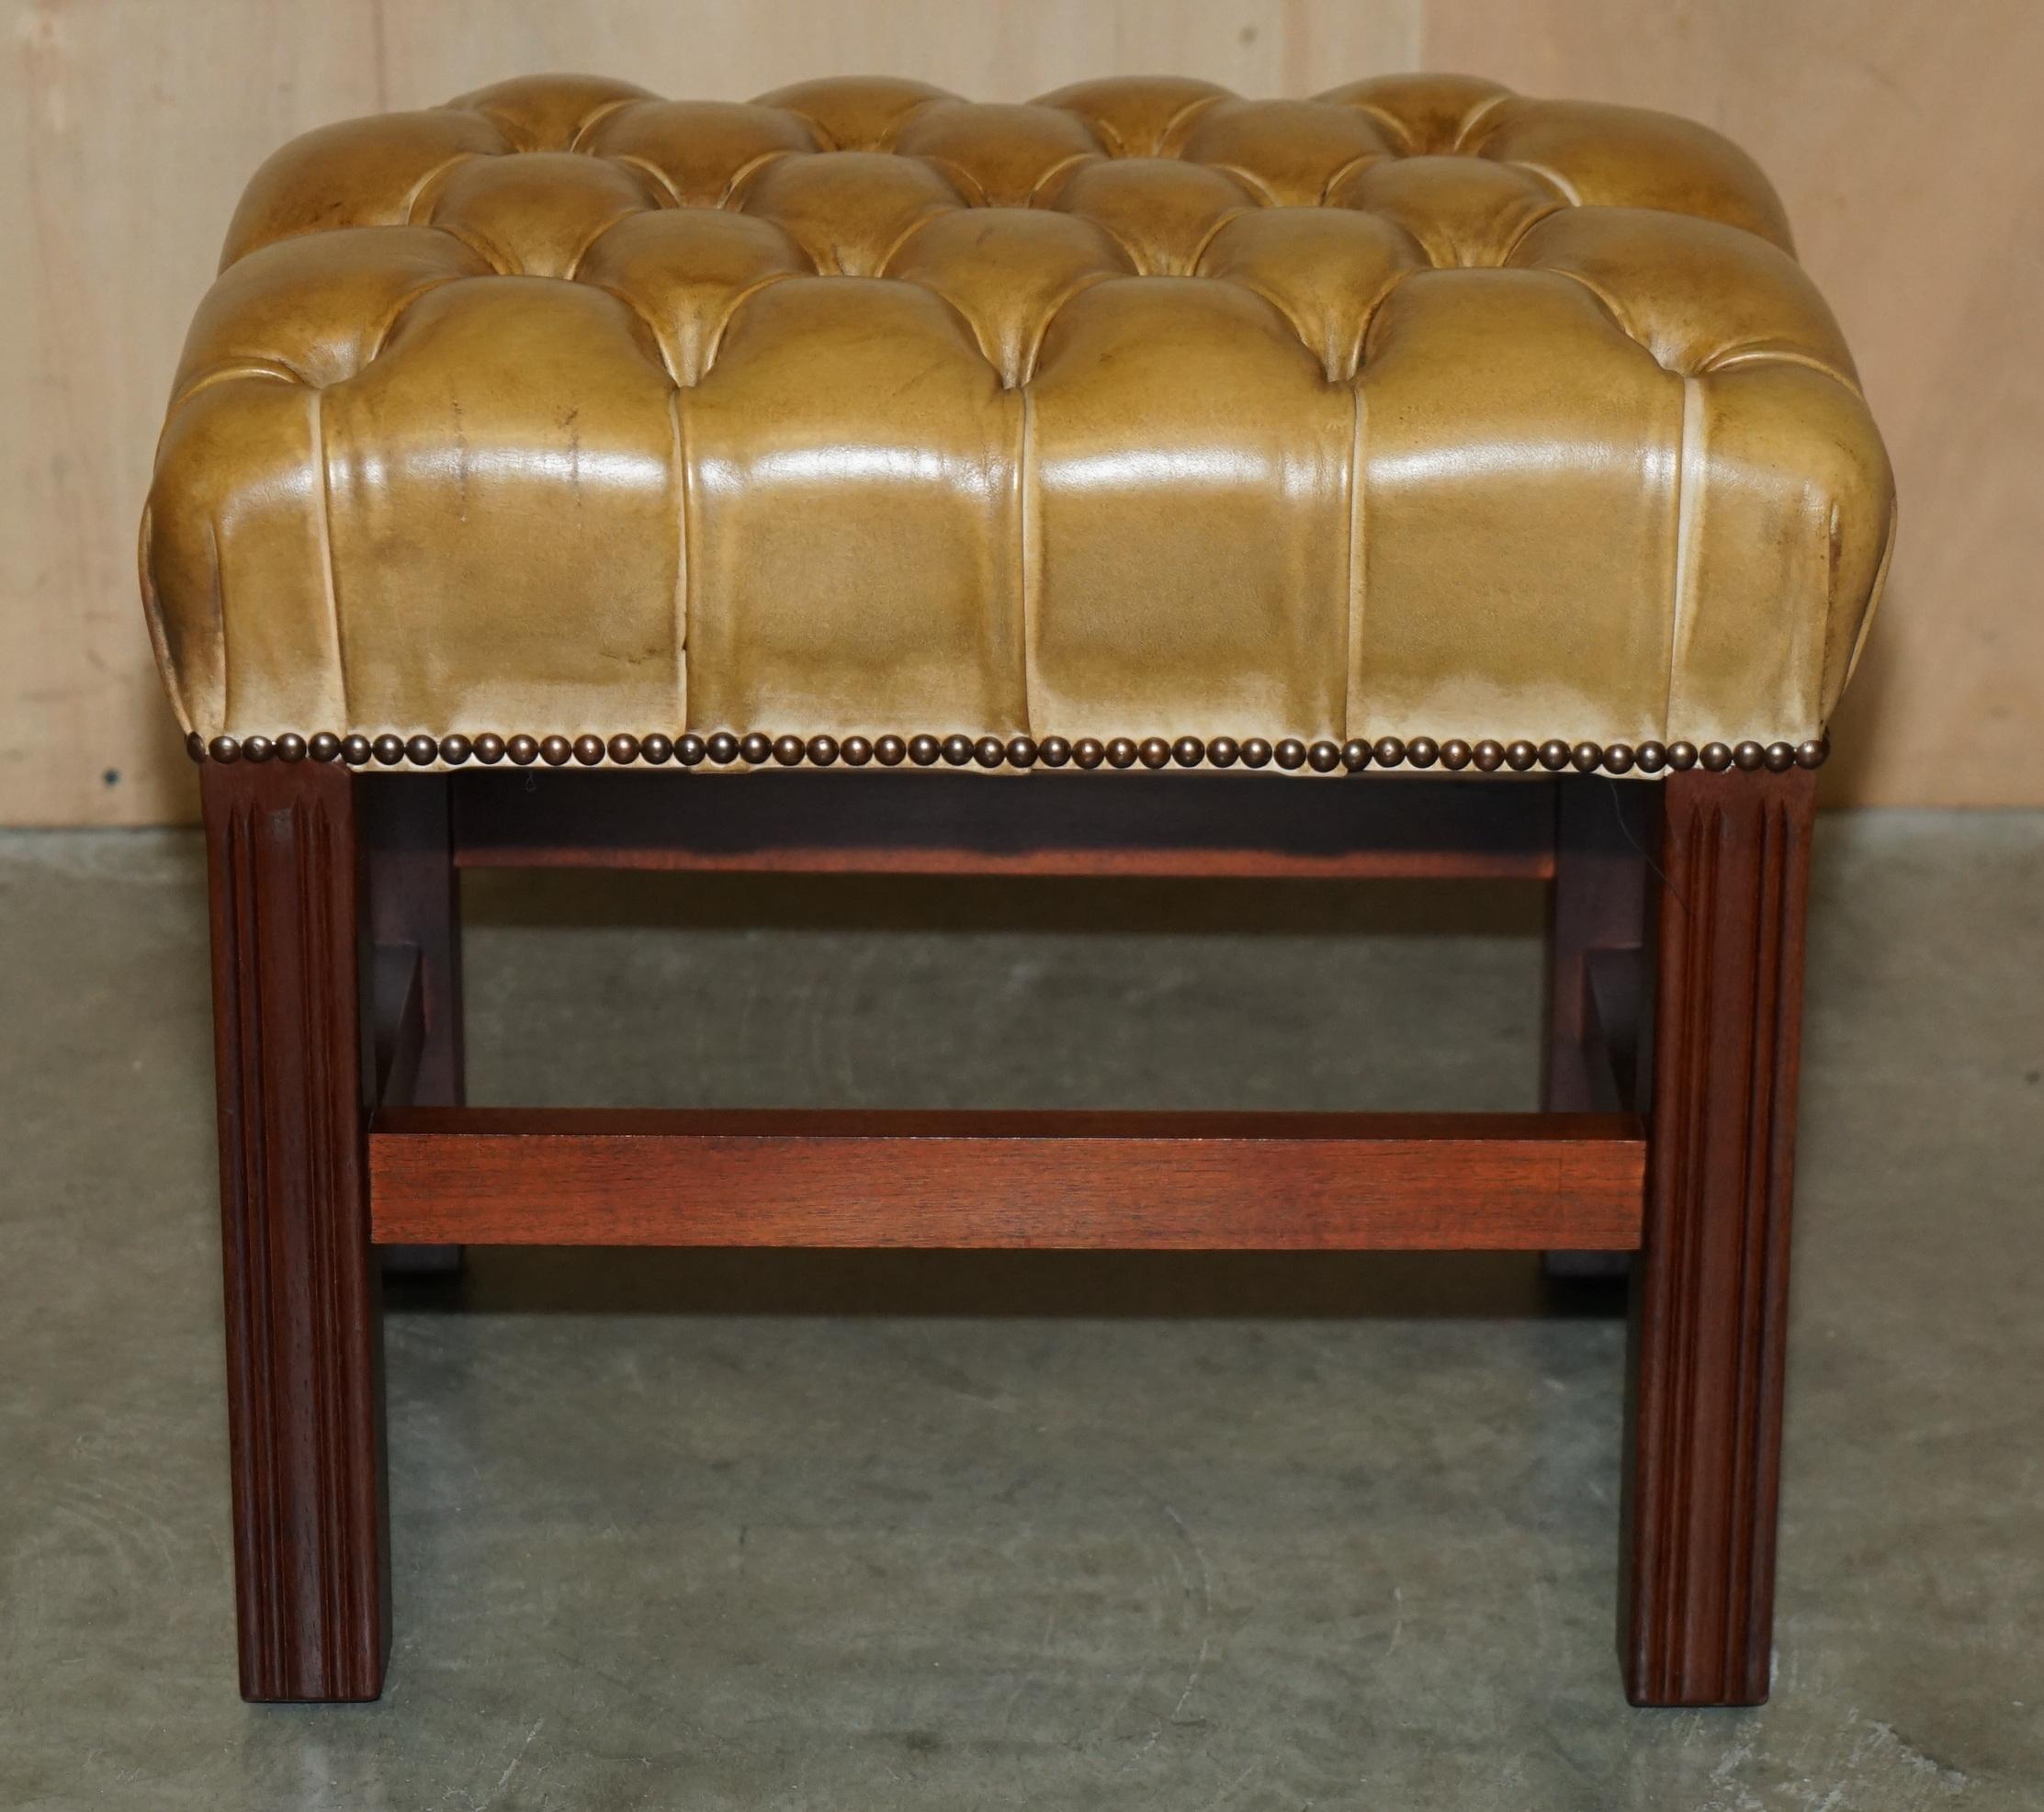 VINTAGE Tan BROWN LEATHER CHESTERFIELD TUFTED BARON FOOTSTOOL PART OF SUiTE im Angebot 1